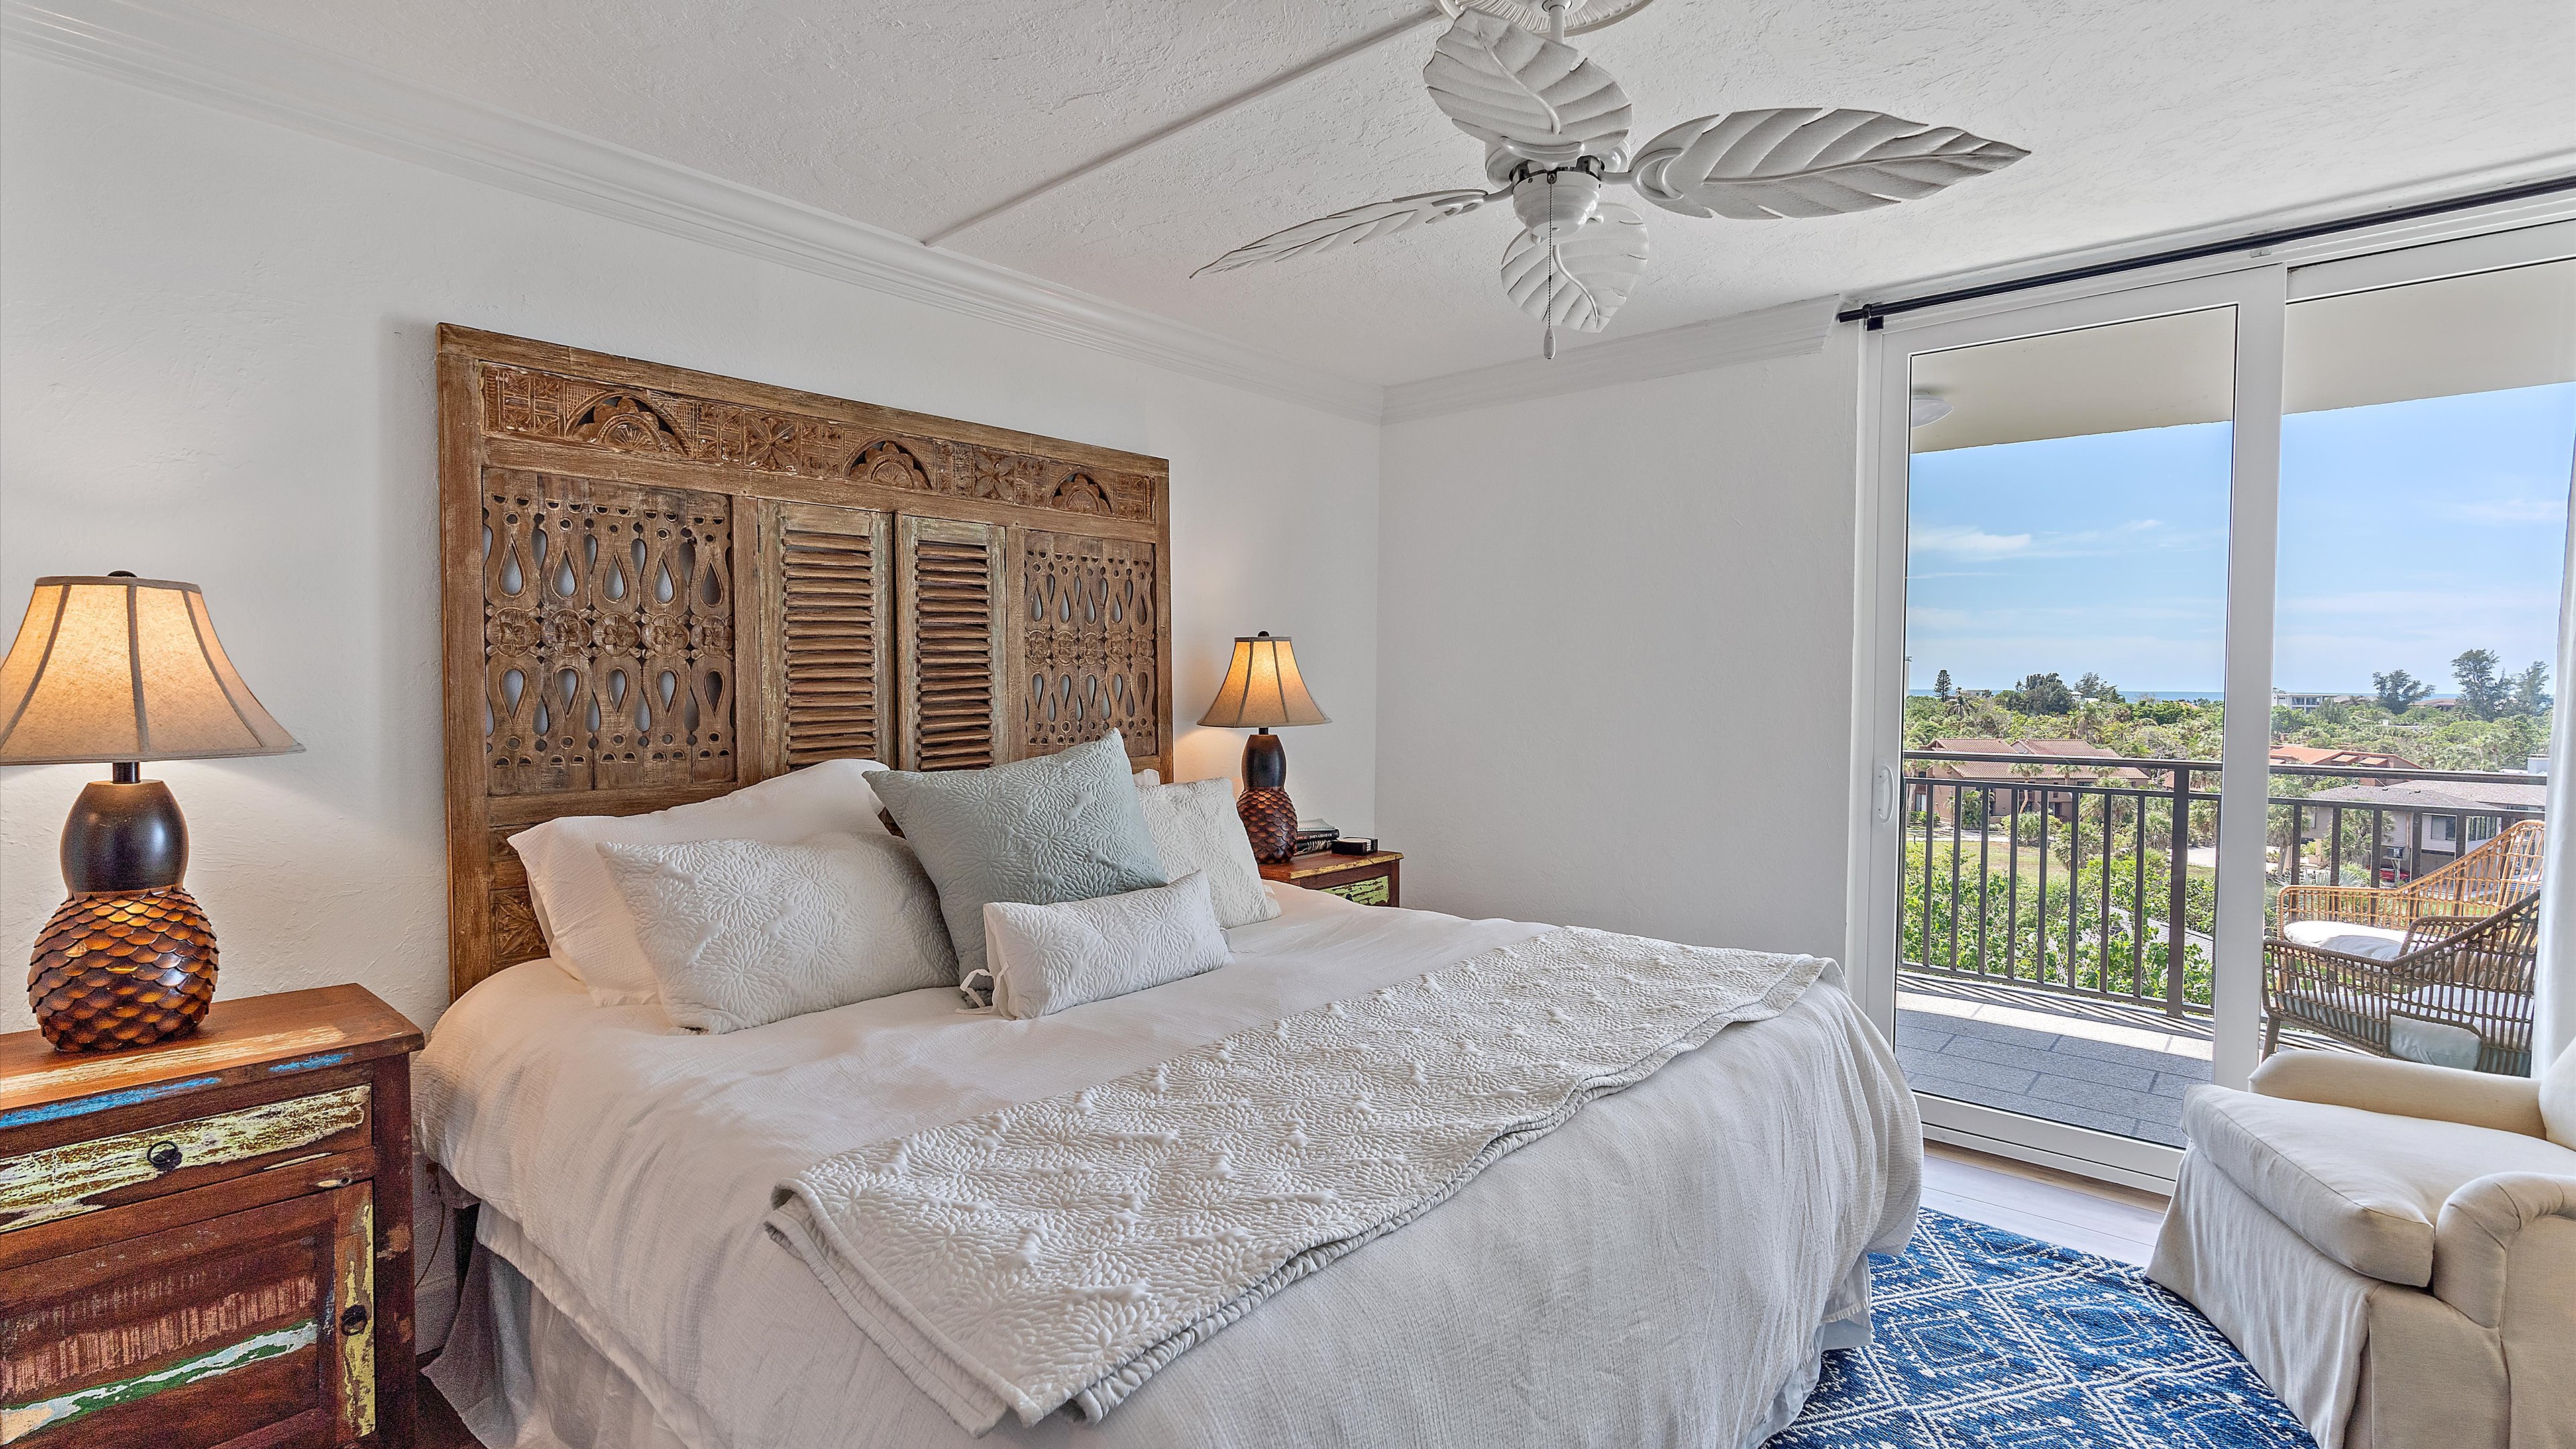 A bedroom with a large bed features a wooden headboard, two bedside tables with lamps, a ceiling fan, and glass doors opening to a balcony with outdoor furniture and a view of trees and buildings.